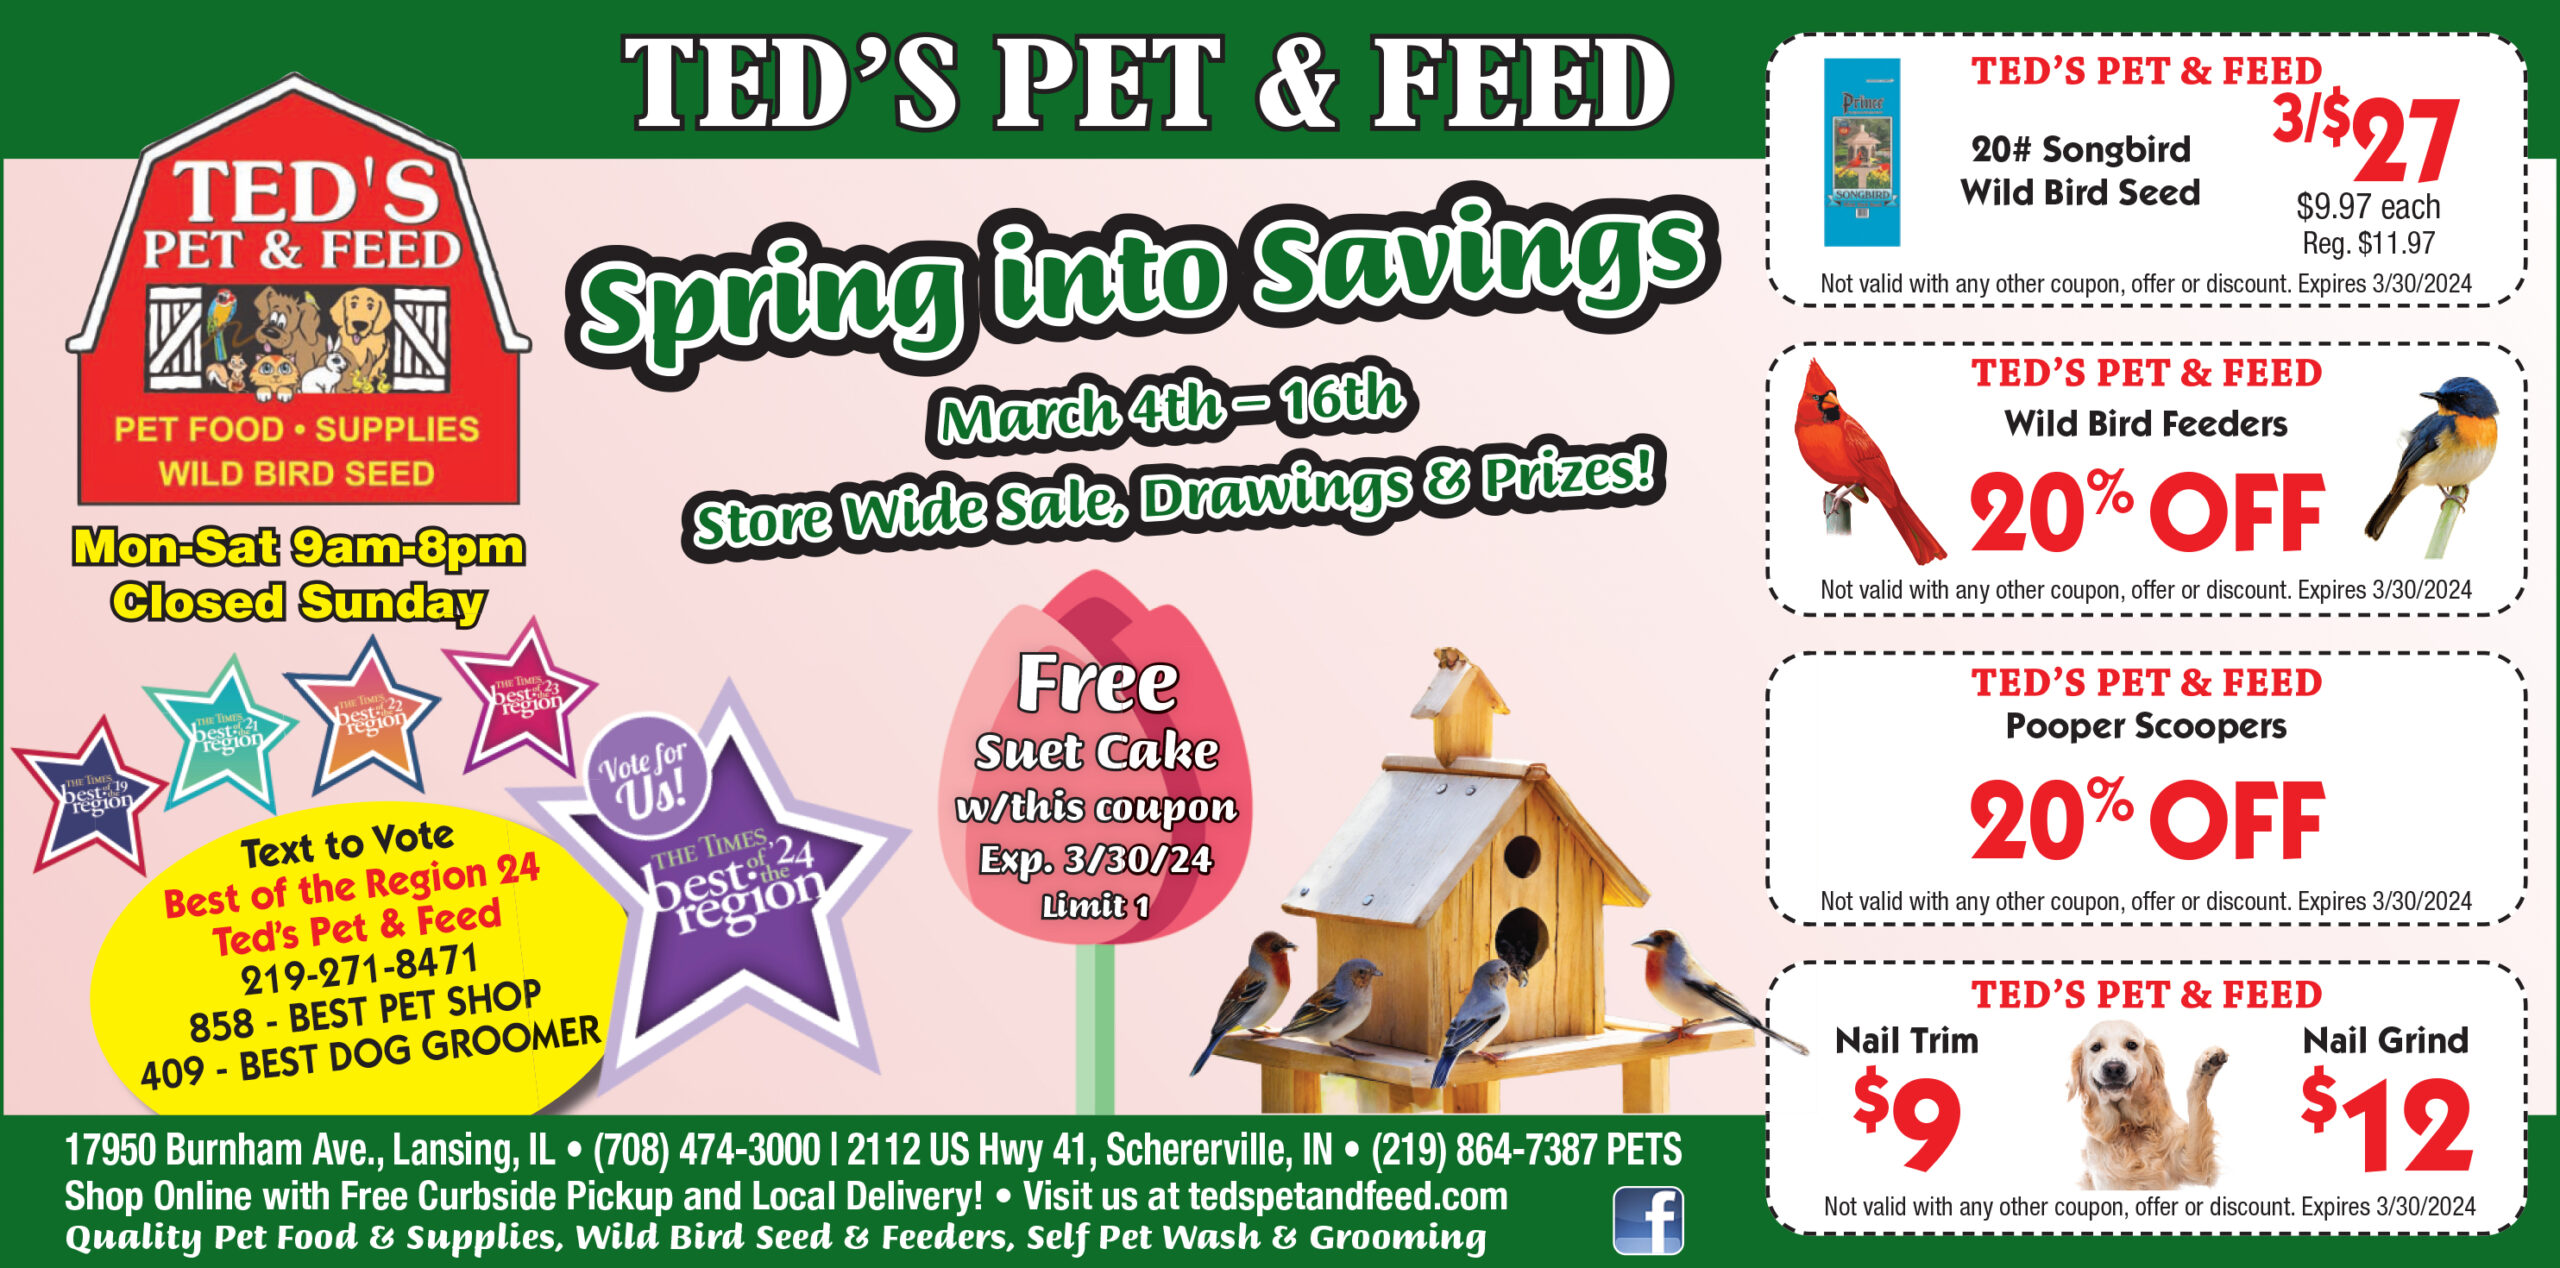 Teds-Pet-Feed-November-2021-Coupons